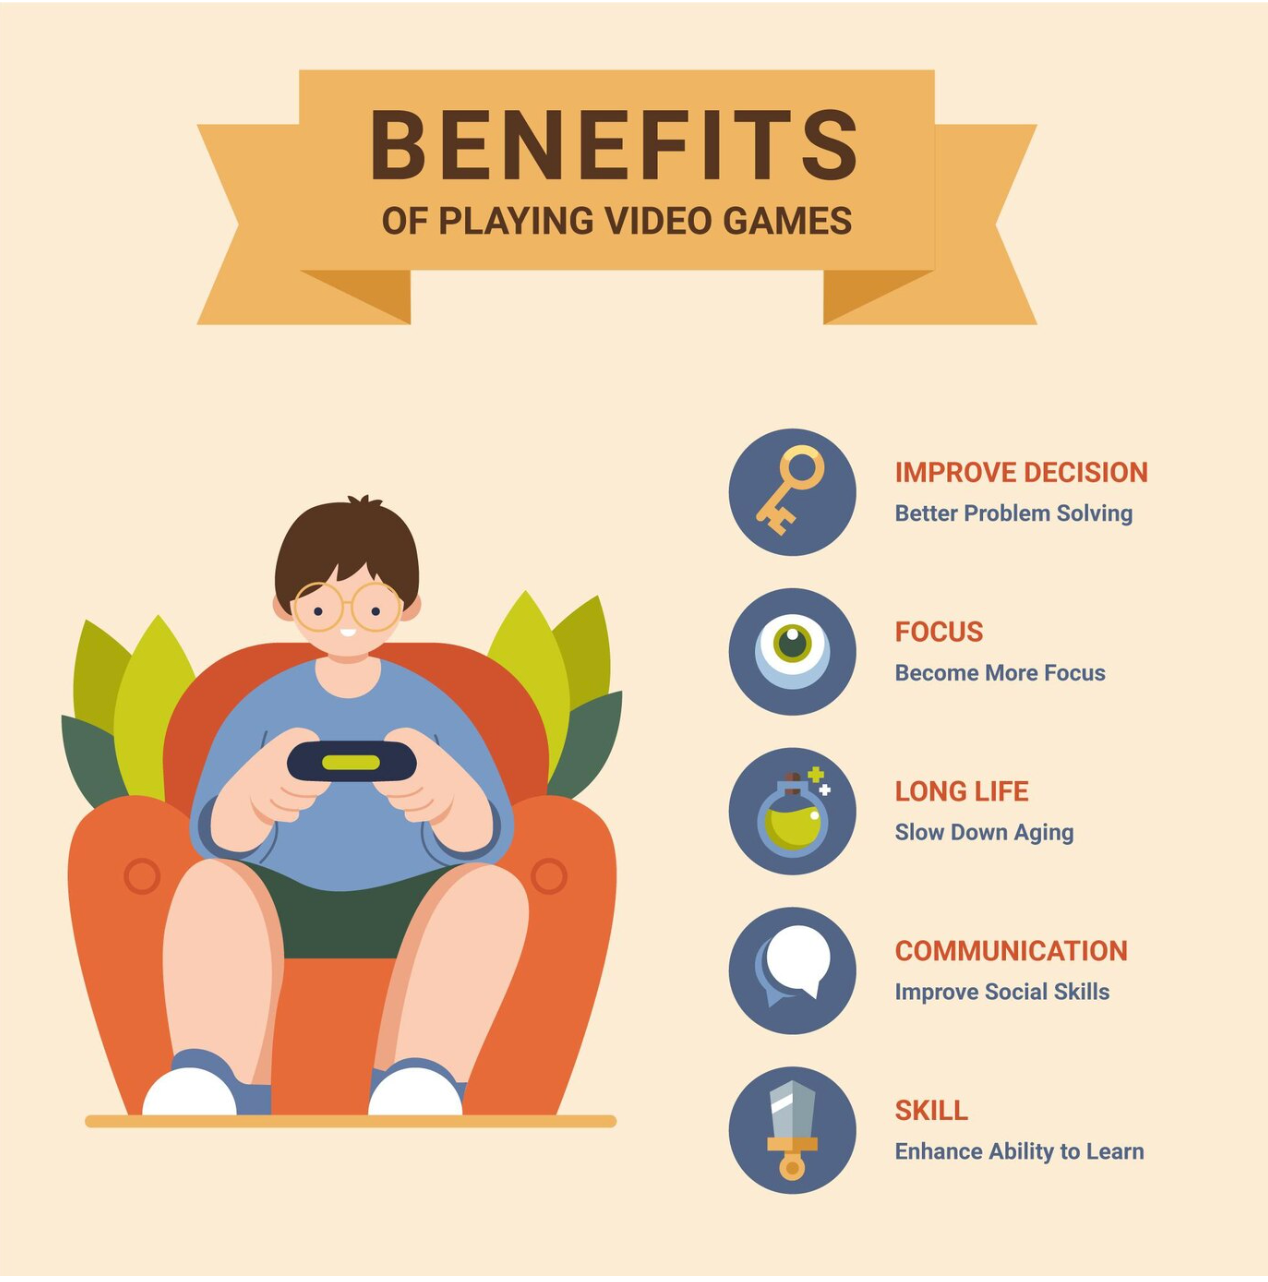 10 pros and cons of online Gaming, by Amit Negi